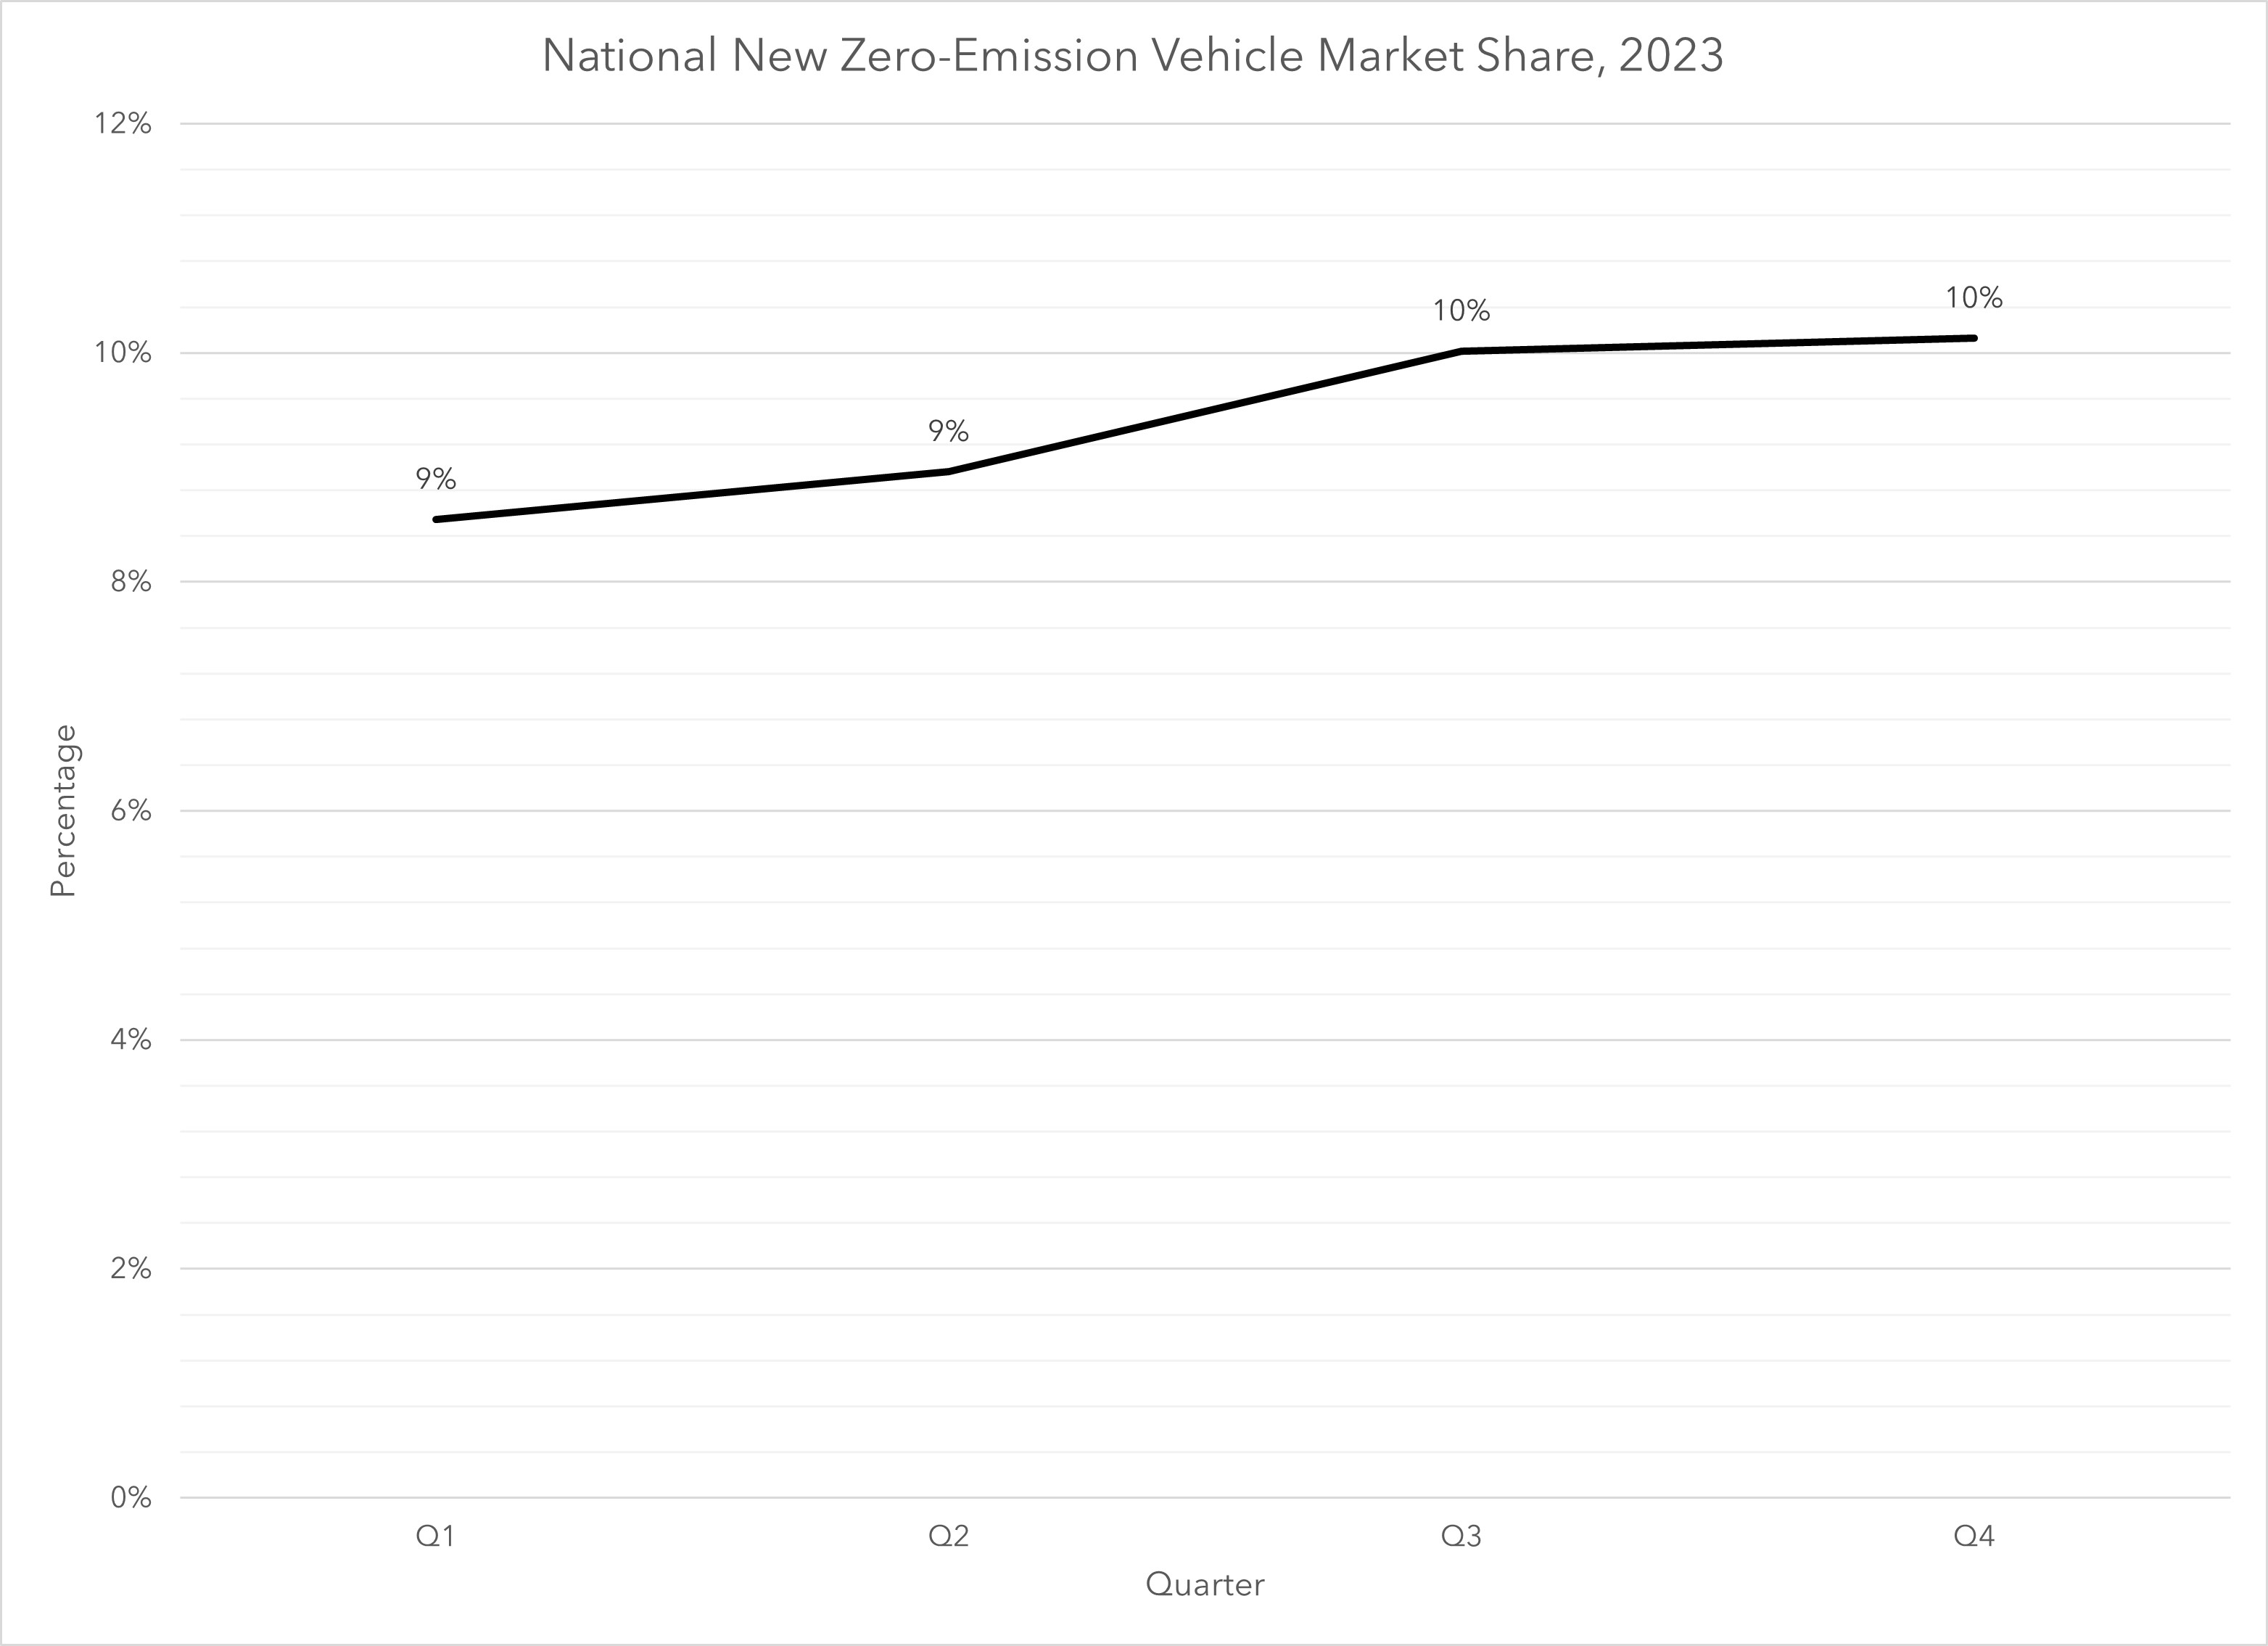 This visual displays California's zero-emission vehicle market share by quarter for 2023. The market share for quarters 1, 2, 3, and 4 is approximately 9 percent, 9 percent, 10 percent, and 10 percent, respectively.